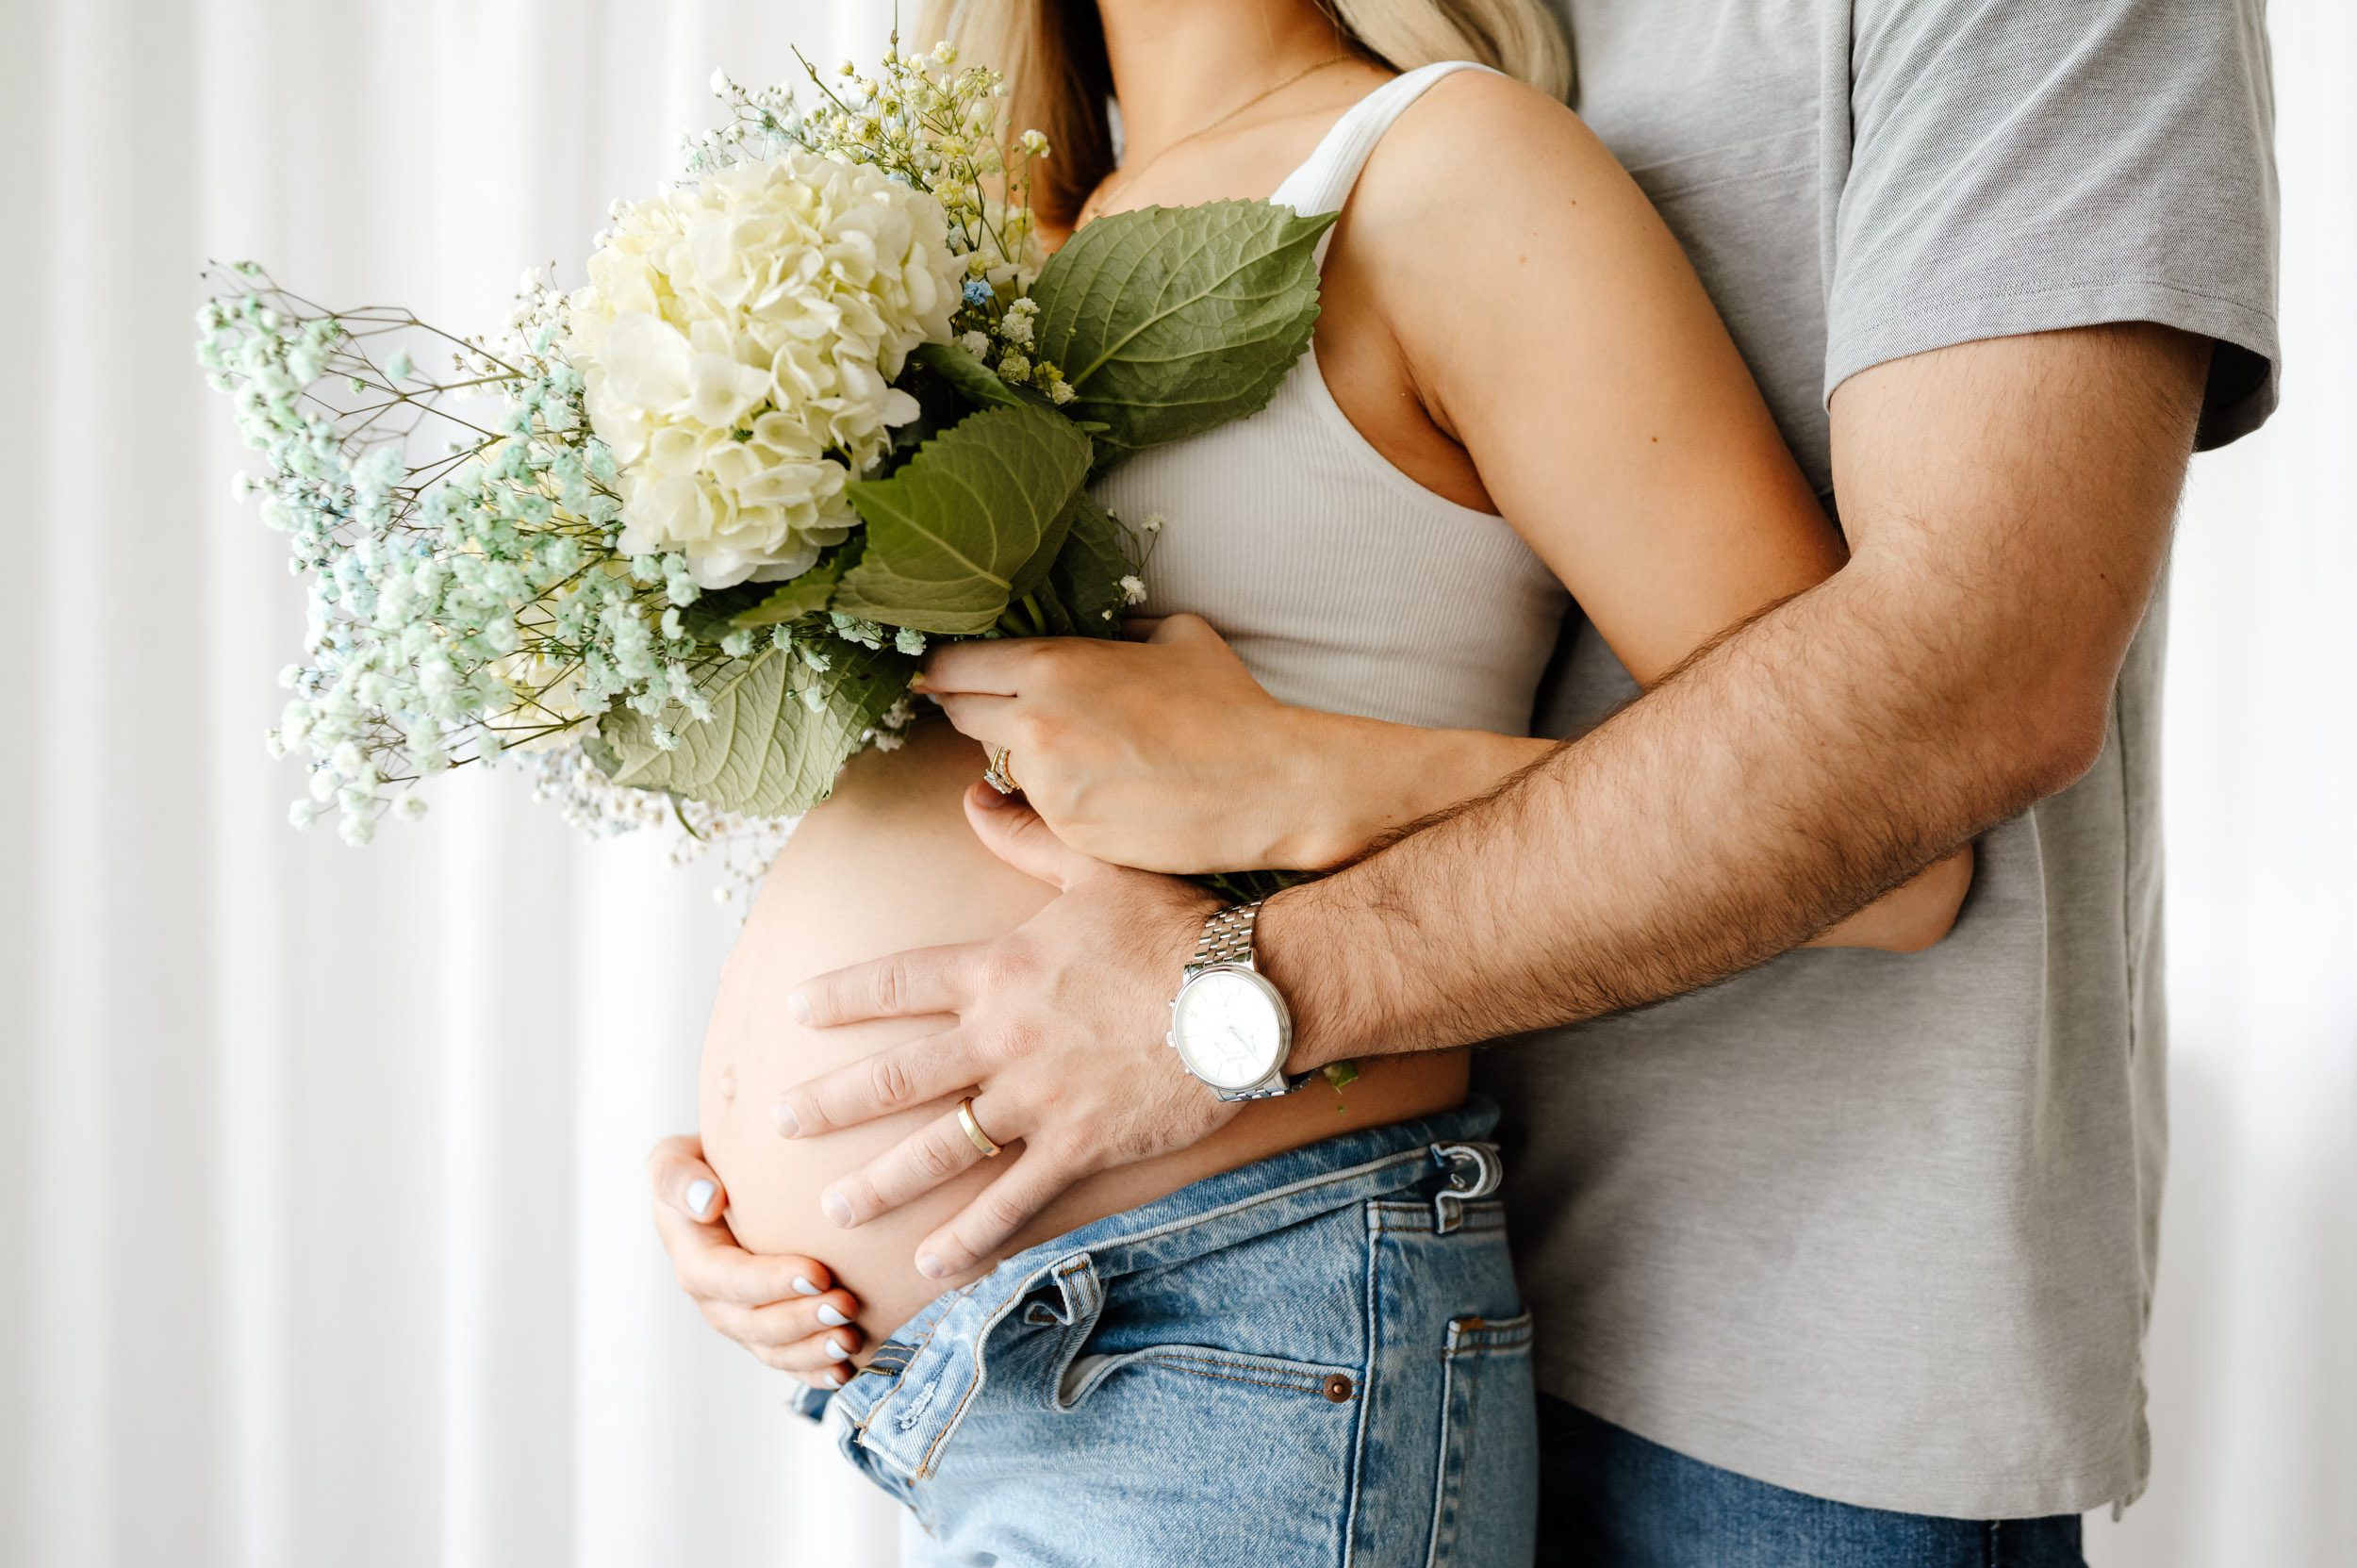 a close up picture of an expecting mom's bare belly as she holds a bouquet of flowers in her hand and dad hugs her from behind during a lifestyle maternity photoshoot